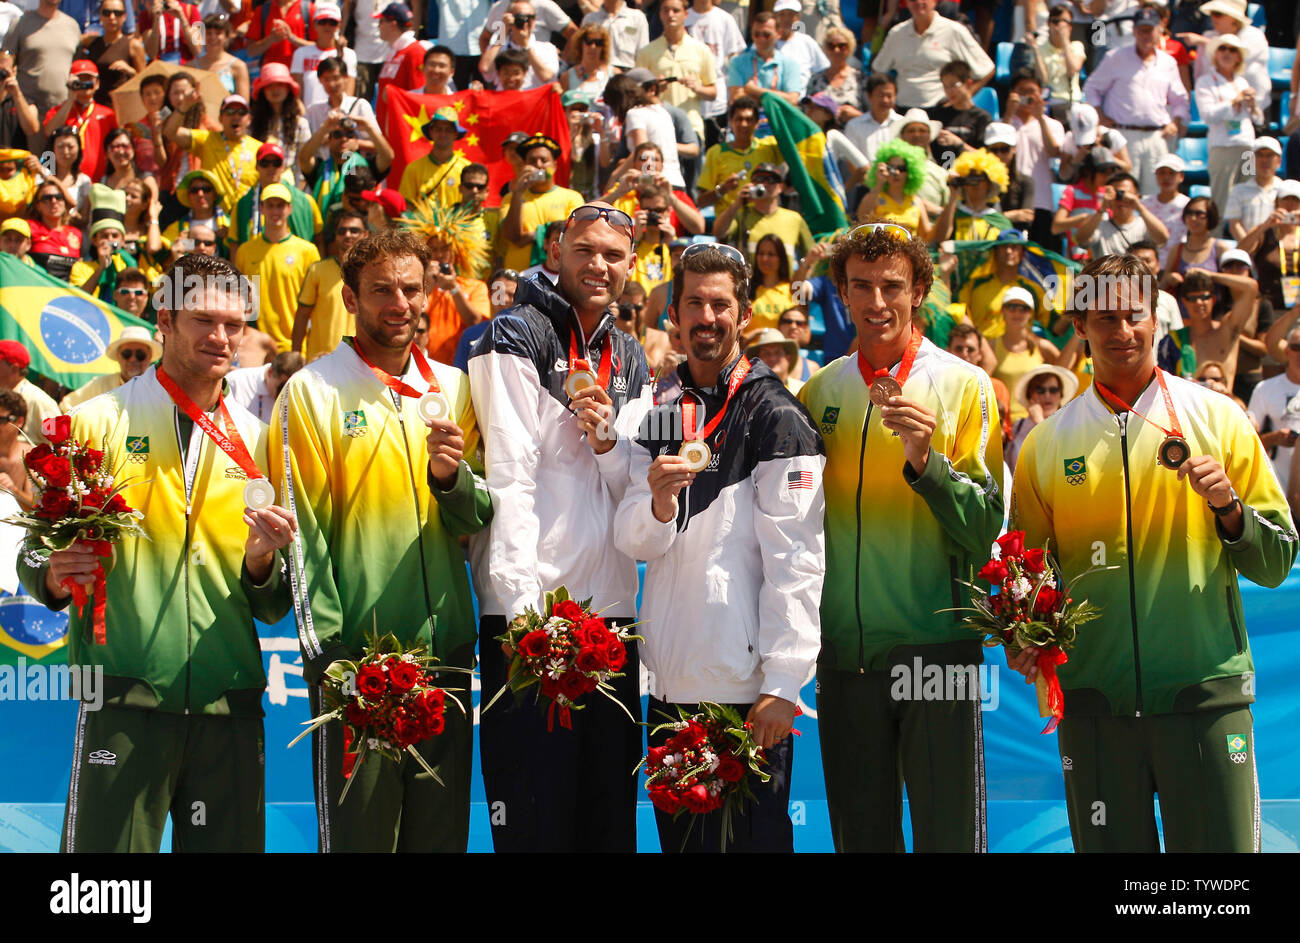 (L-R) Silver medalists Fabio Magalhaes and Marcio Araujo of Brazil, gold medalists Philip Dalhausser and Todd Rogers of the U.S. and bronze medalists Emanuel Rego and Ricardo Santos of Brazil celebrate on the podium during the men's beach volleyball medal ceremony at the Beijing 2008 Olympic Games August 22, 2008.   (UPI Photo/Stephen Shaver) Stock Photo